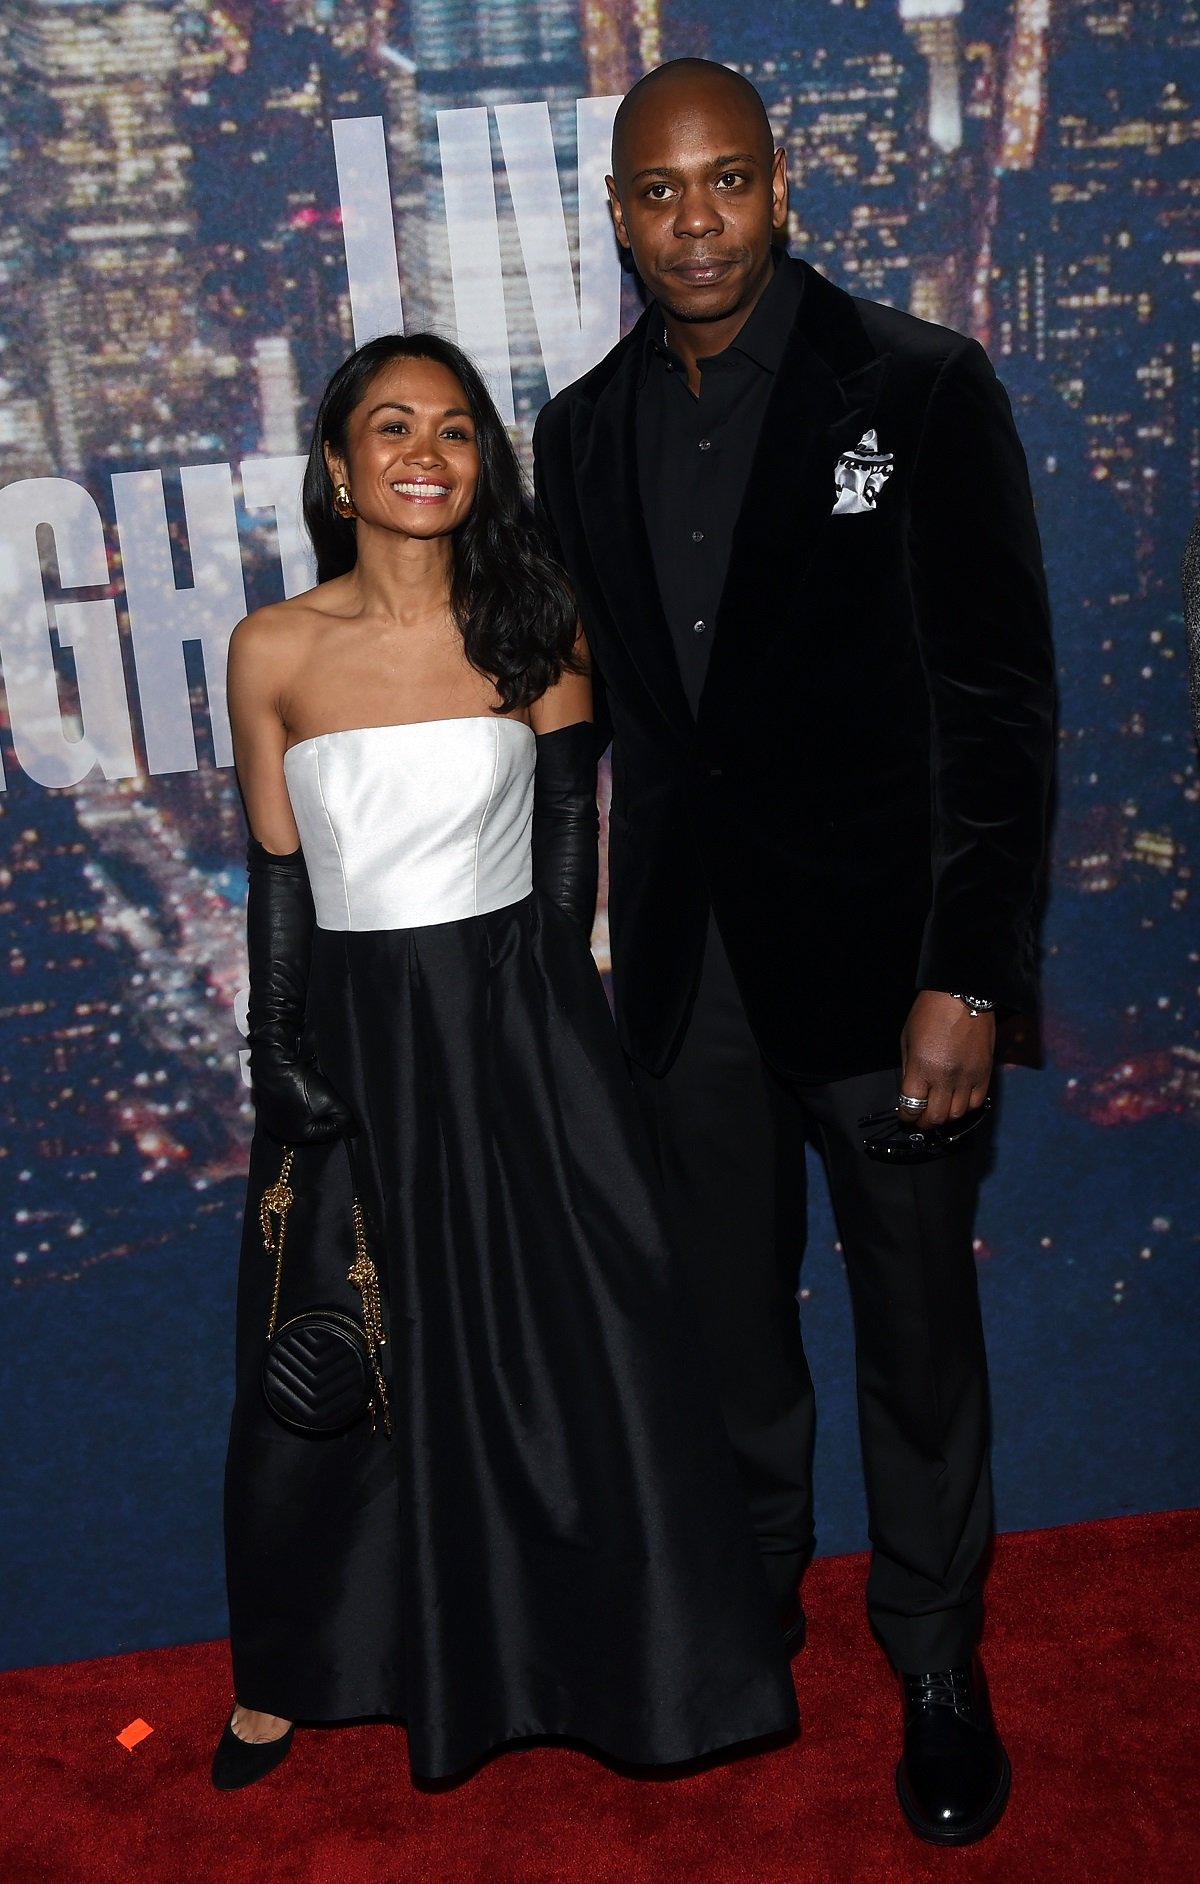 Meet Dave Chappelle’s Wife Elaine and His 3 Children Inside the